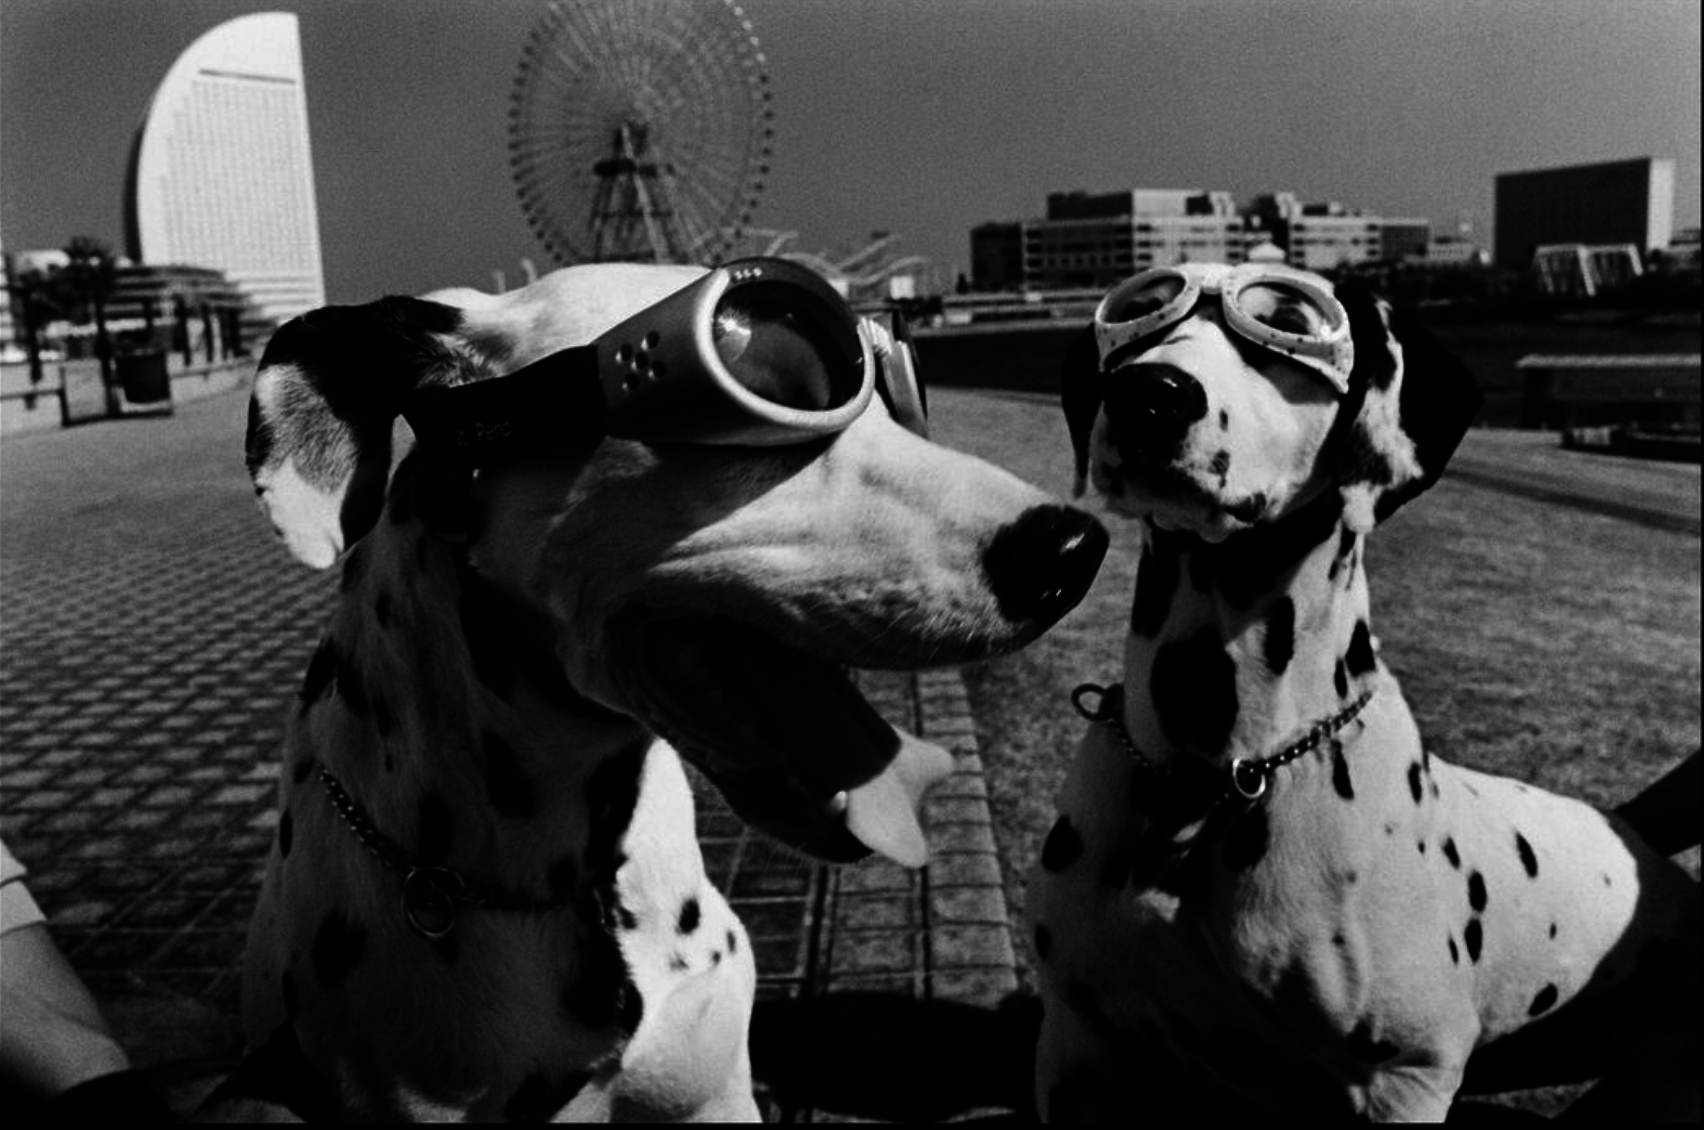 Two black and white dogs seen at the carnival wearing goggles